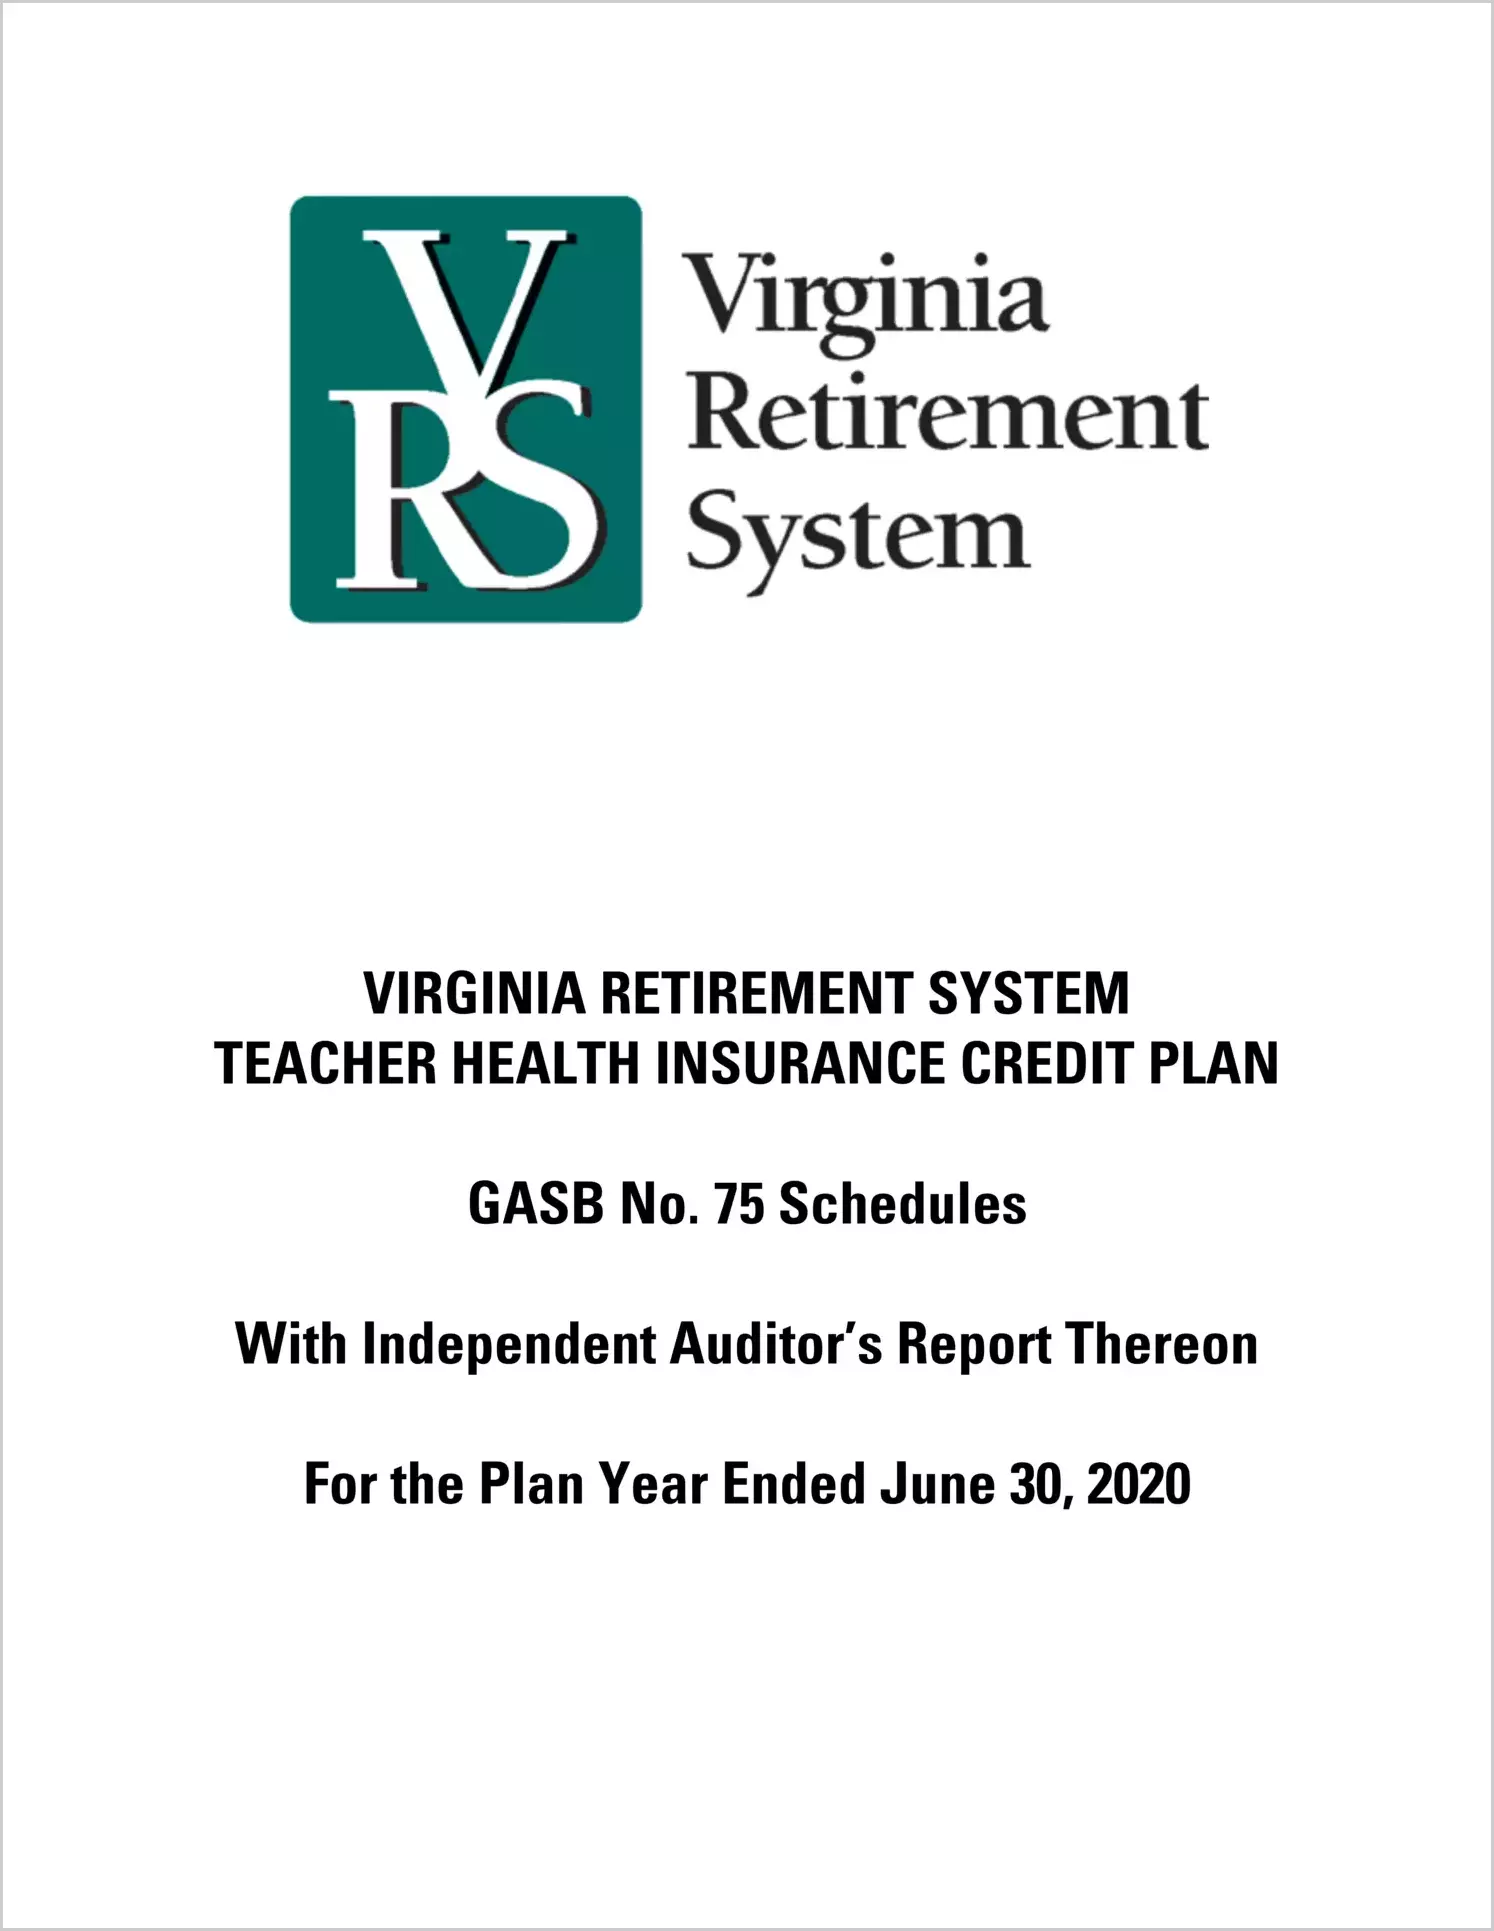 GASB 75 Schedules - Virginia Retirement System Teacher Health Insurance Credit Plan for the year ended June 30, 2020